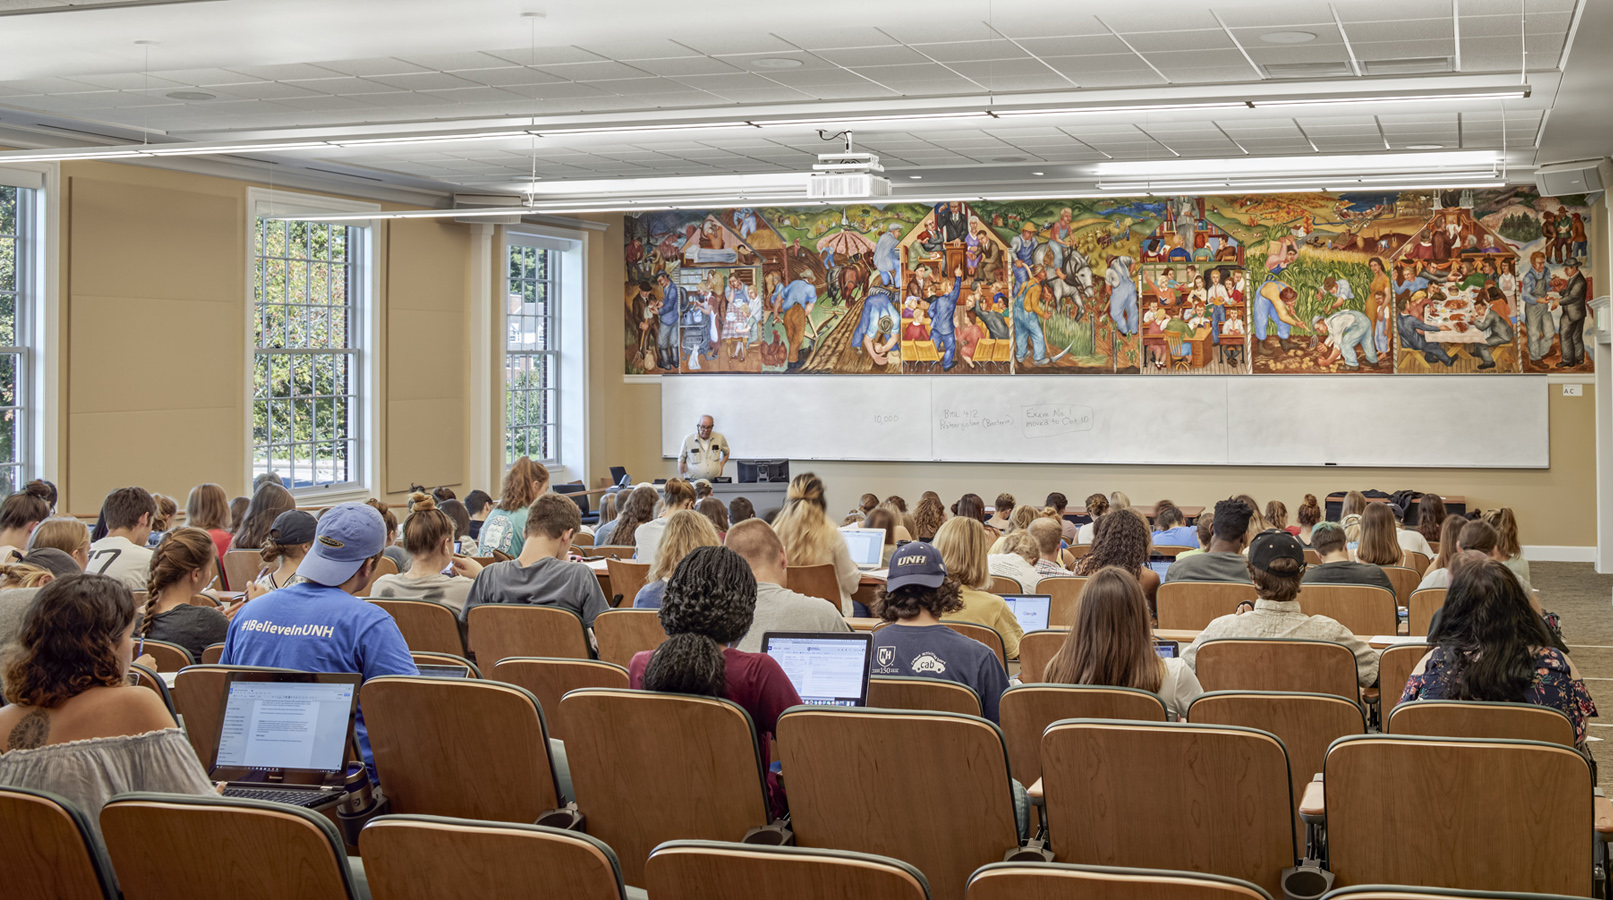 University of New Hampshire Smith Hall lecture hall with mural